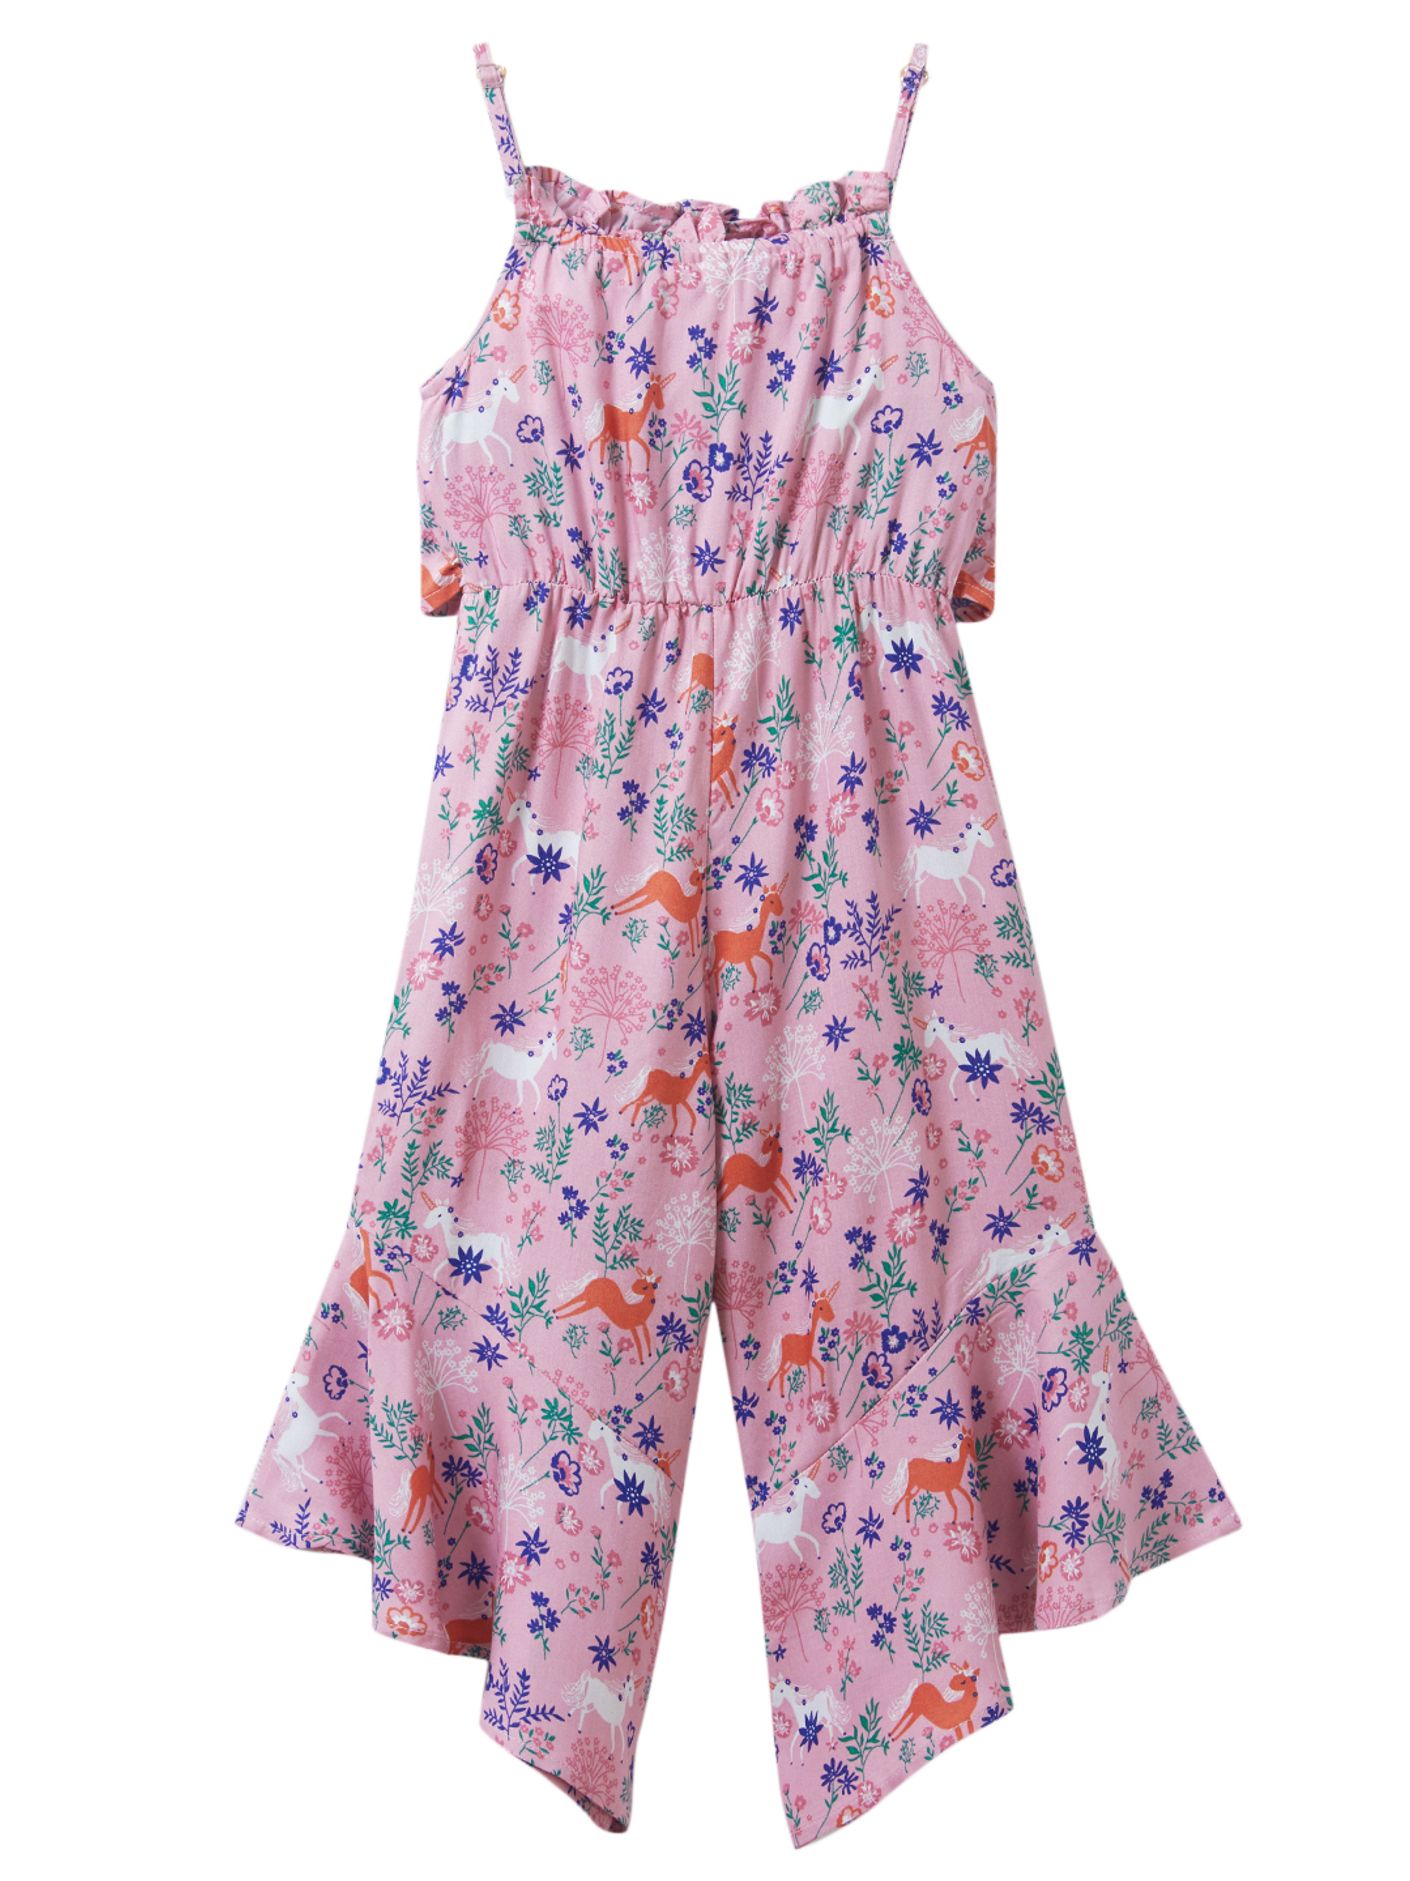 Jumpsuit for 12 Year Girls - Buy Pink Floral Jumpsuit for 4 - 12 Year ...